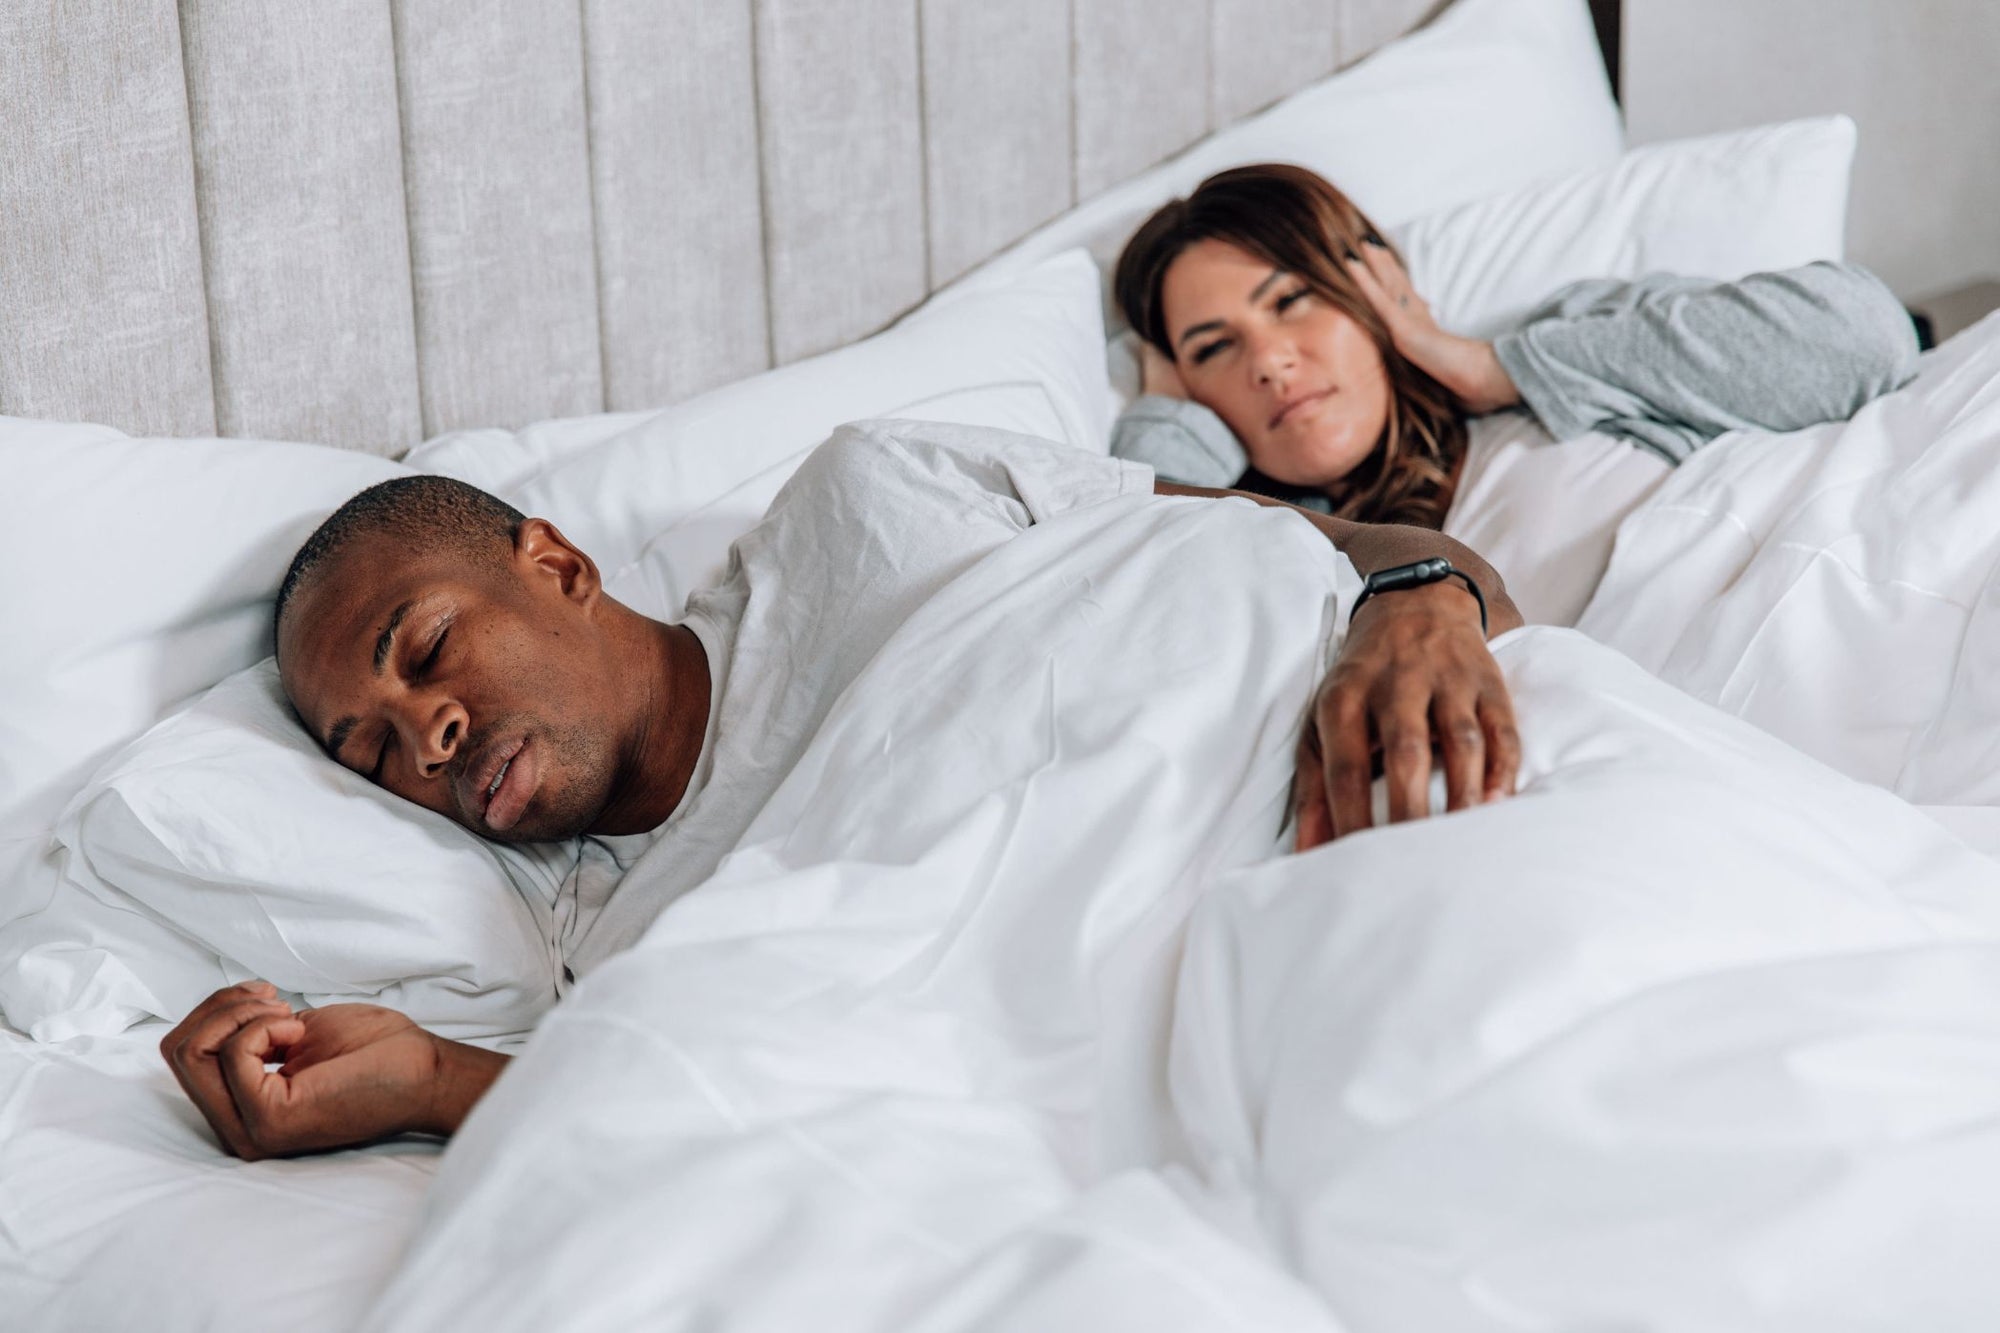 Can't sleep? What to Do if Your Partner Snores